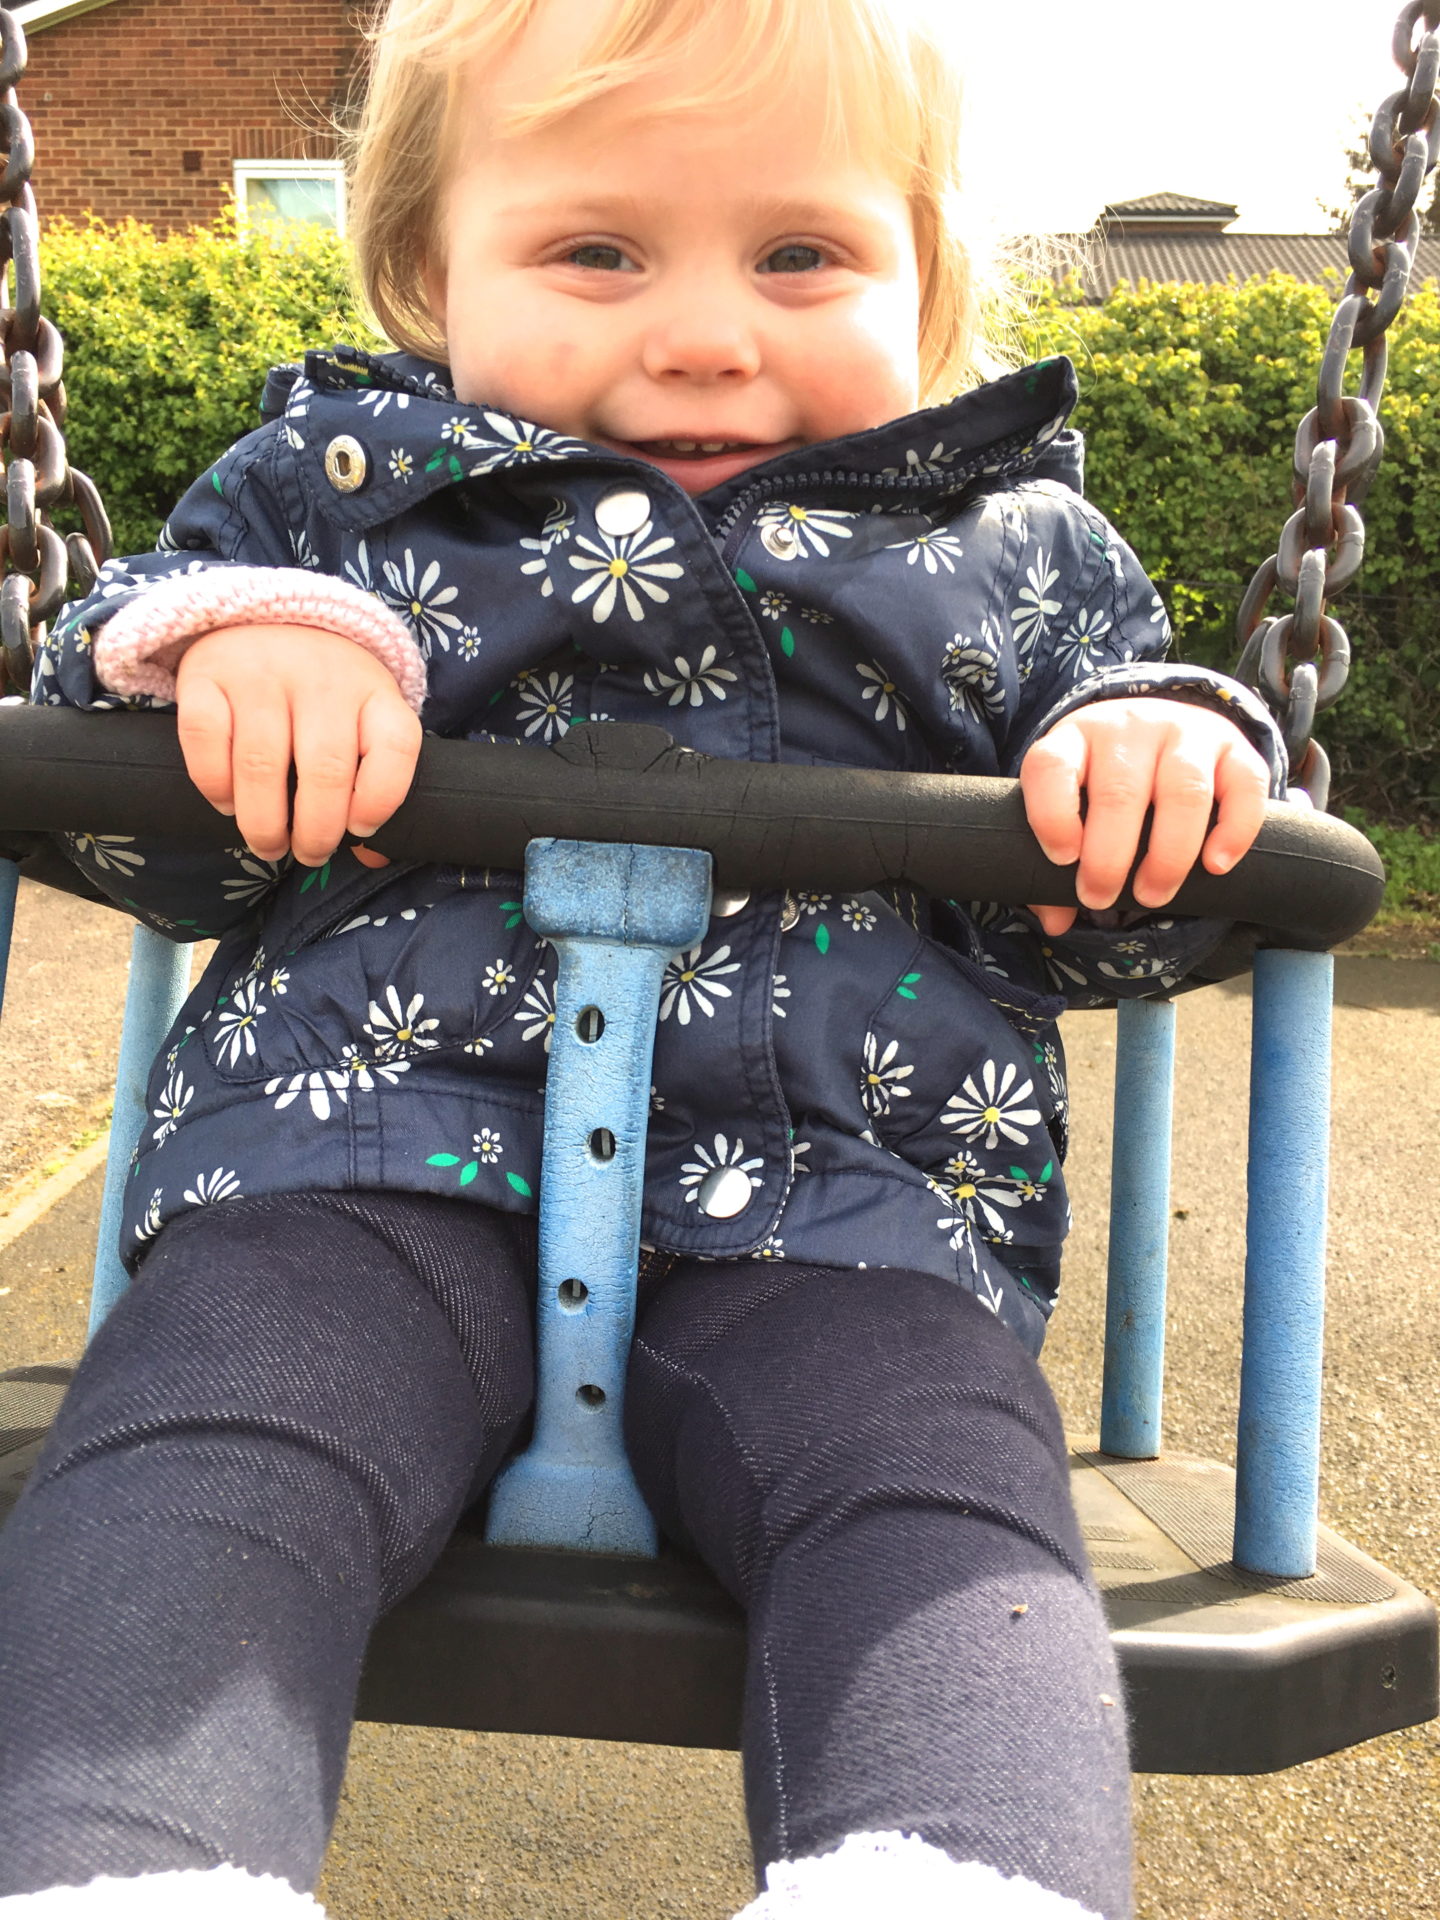 14 months old girl sitting in a swing